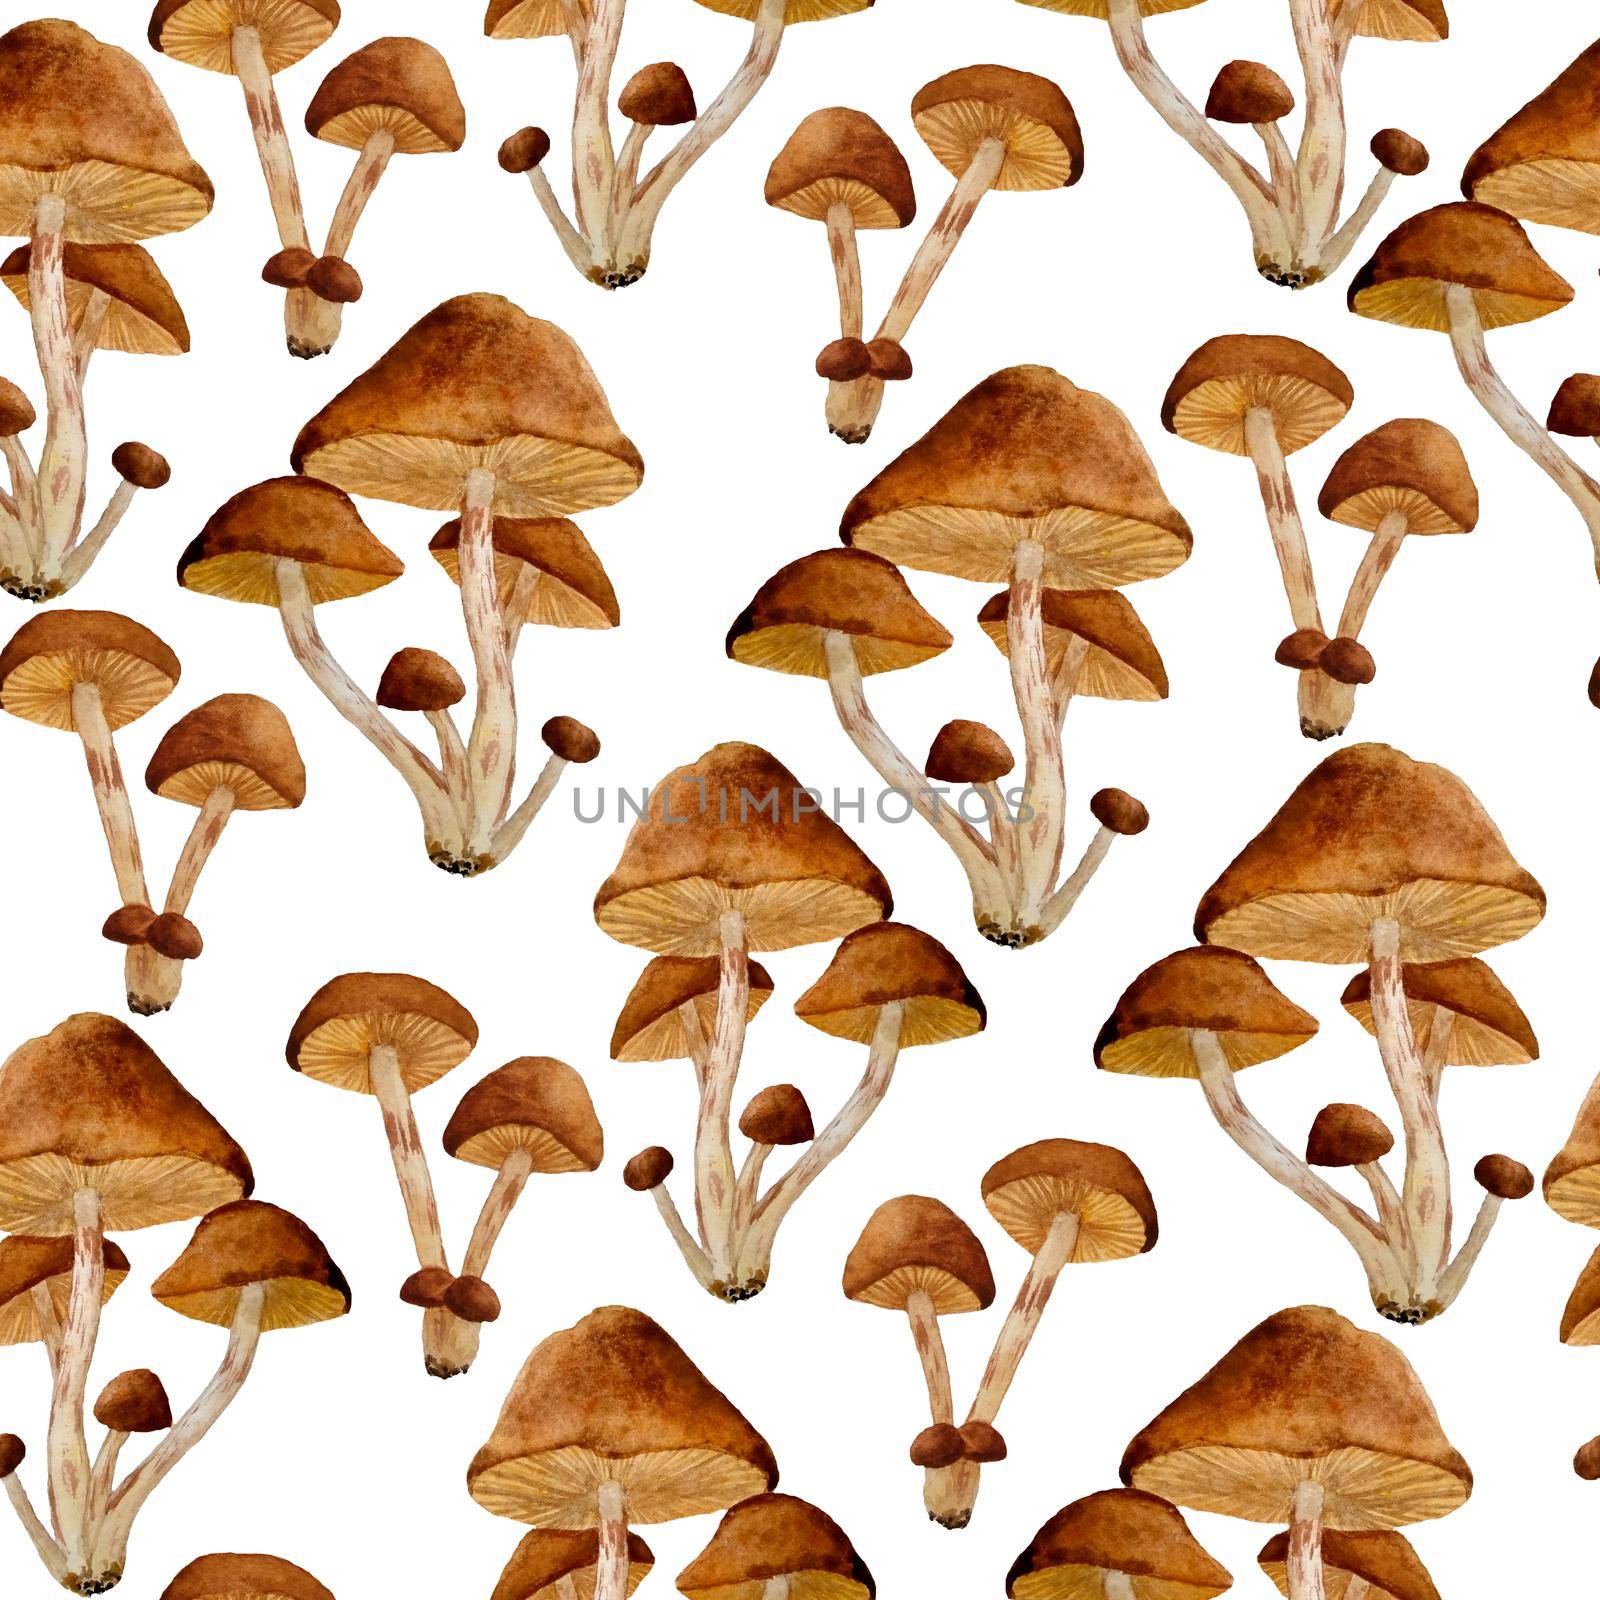 watercolor hand drawn seamless pattern poisonous dangerous mushroom illustration of webcap fungi. Brown ochre caps dark dry leaves in fall autumn forest wood woodland nature Halloween scrapbook design